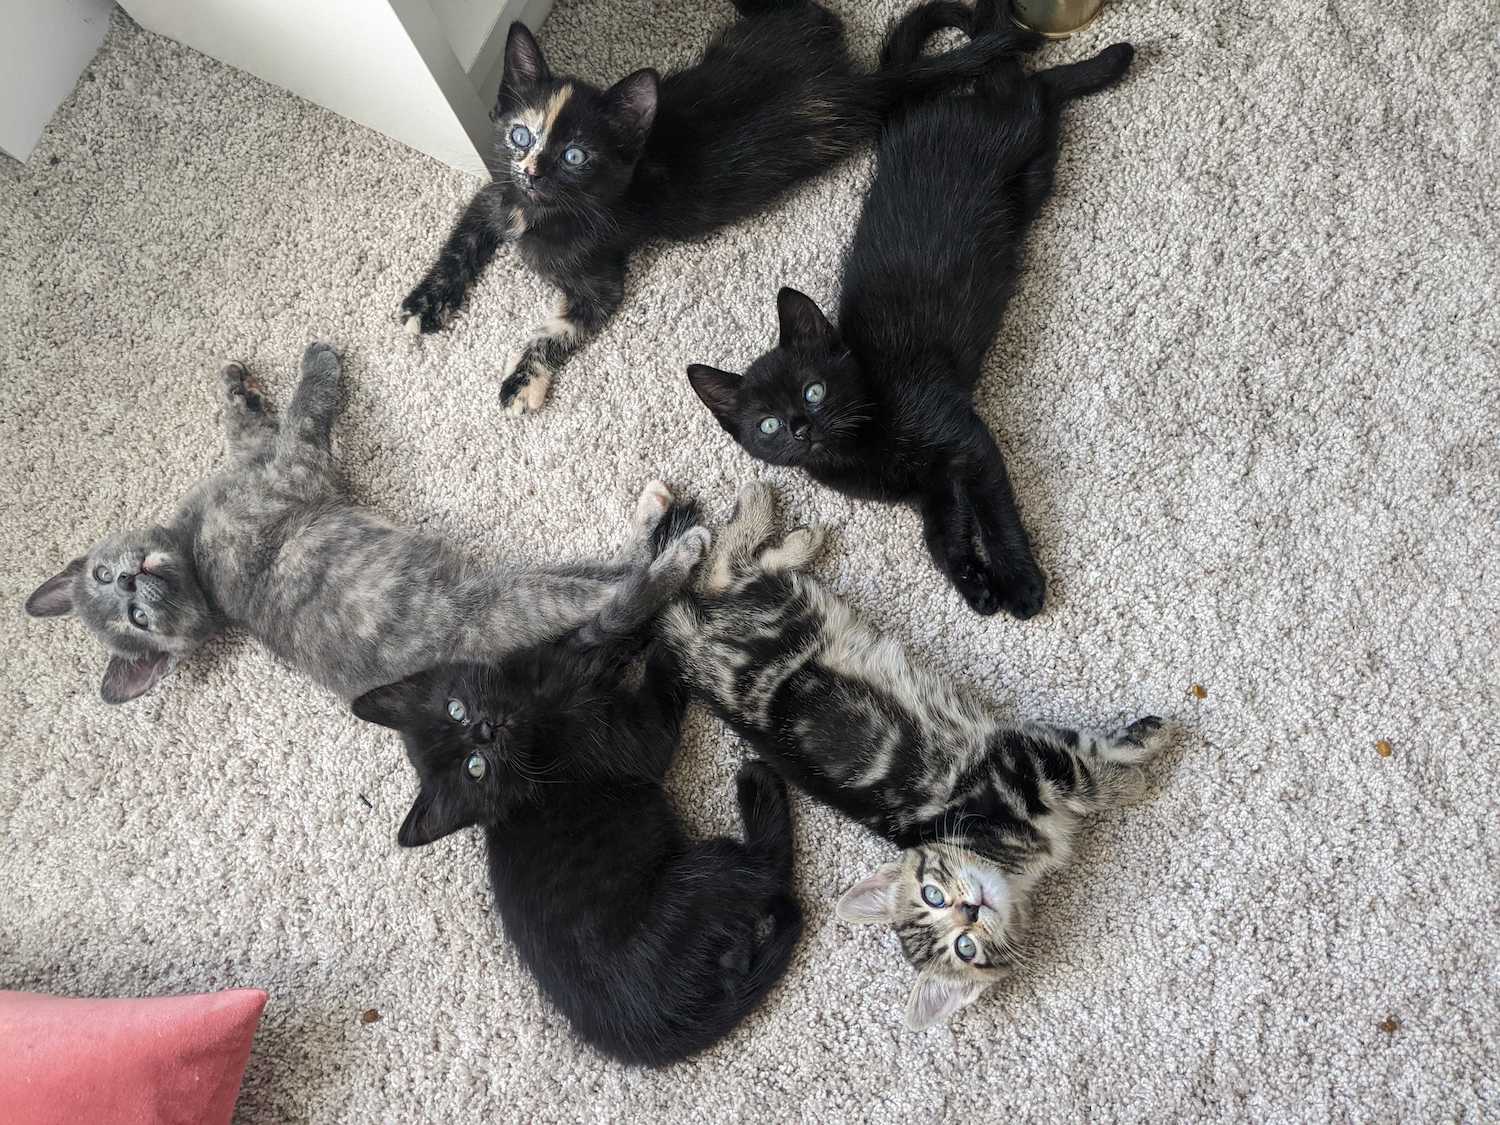 Five small kittens laying on the floor